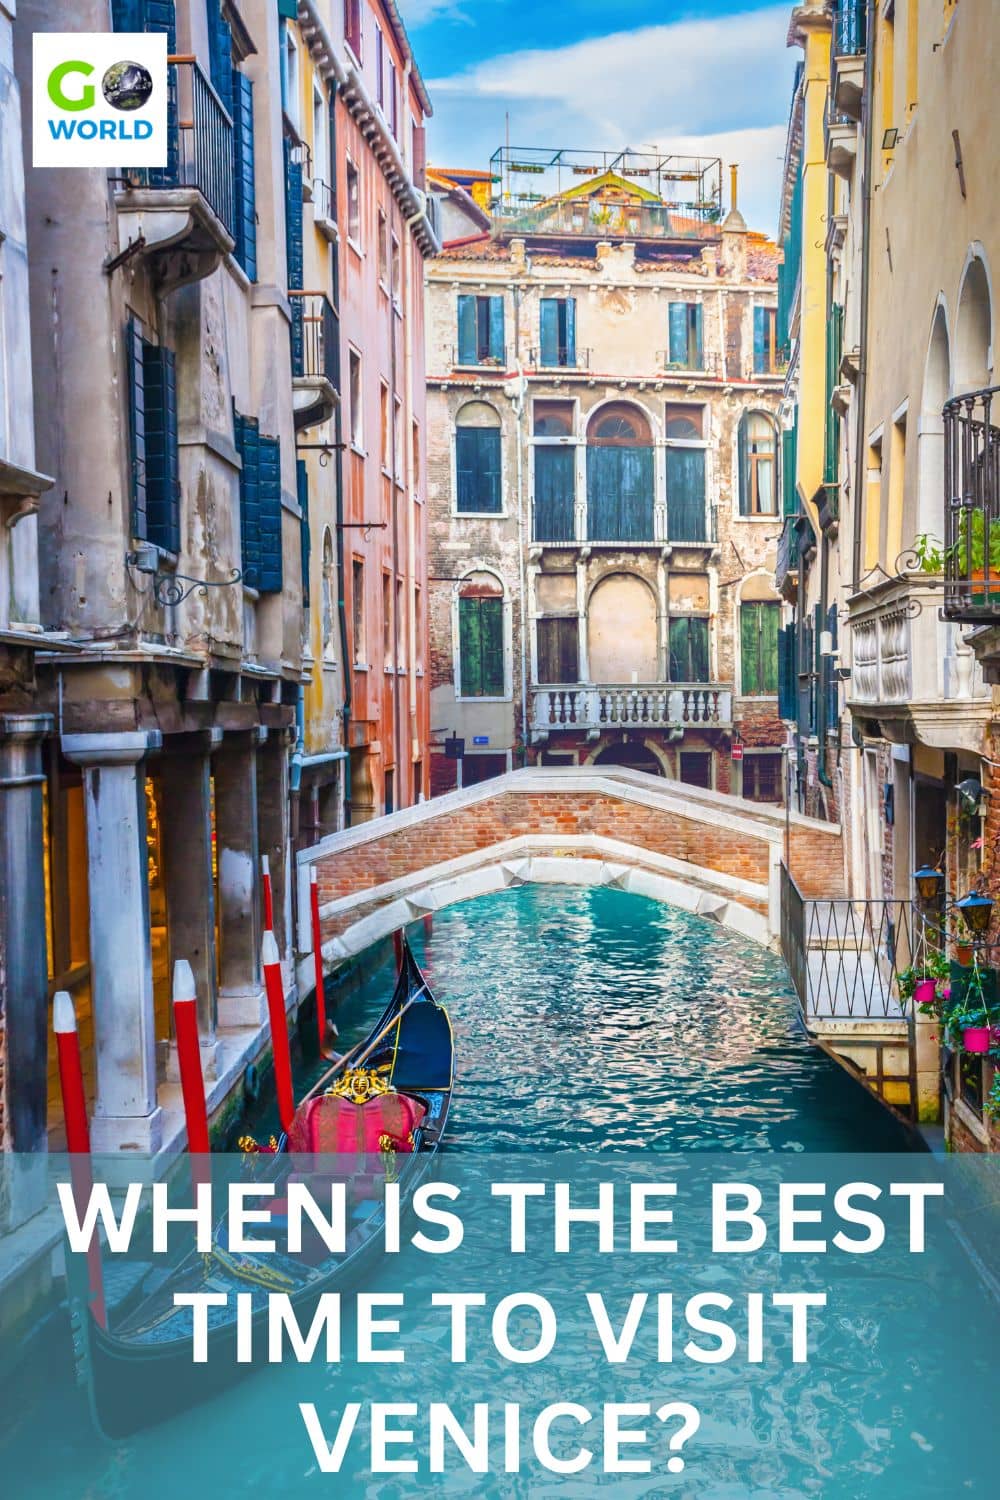 Choose the best time to visit Venice and experience the Venetian atmosphere with this guide on what to expect every month of the year. #veniceitaly #besttimetovisitvenice